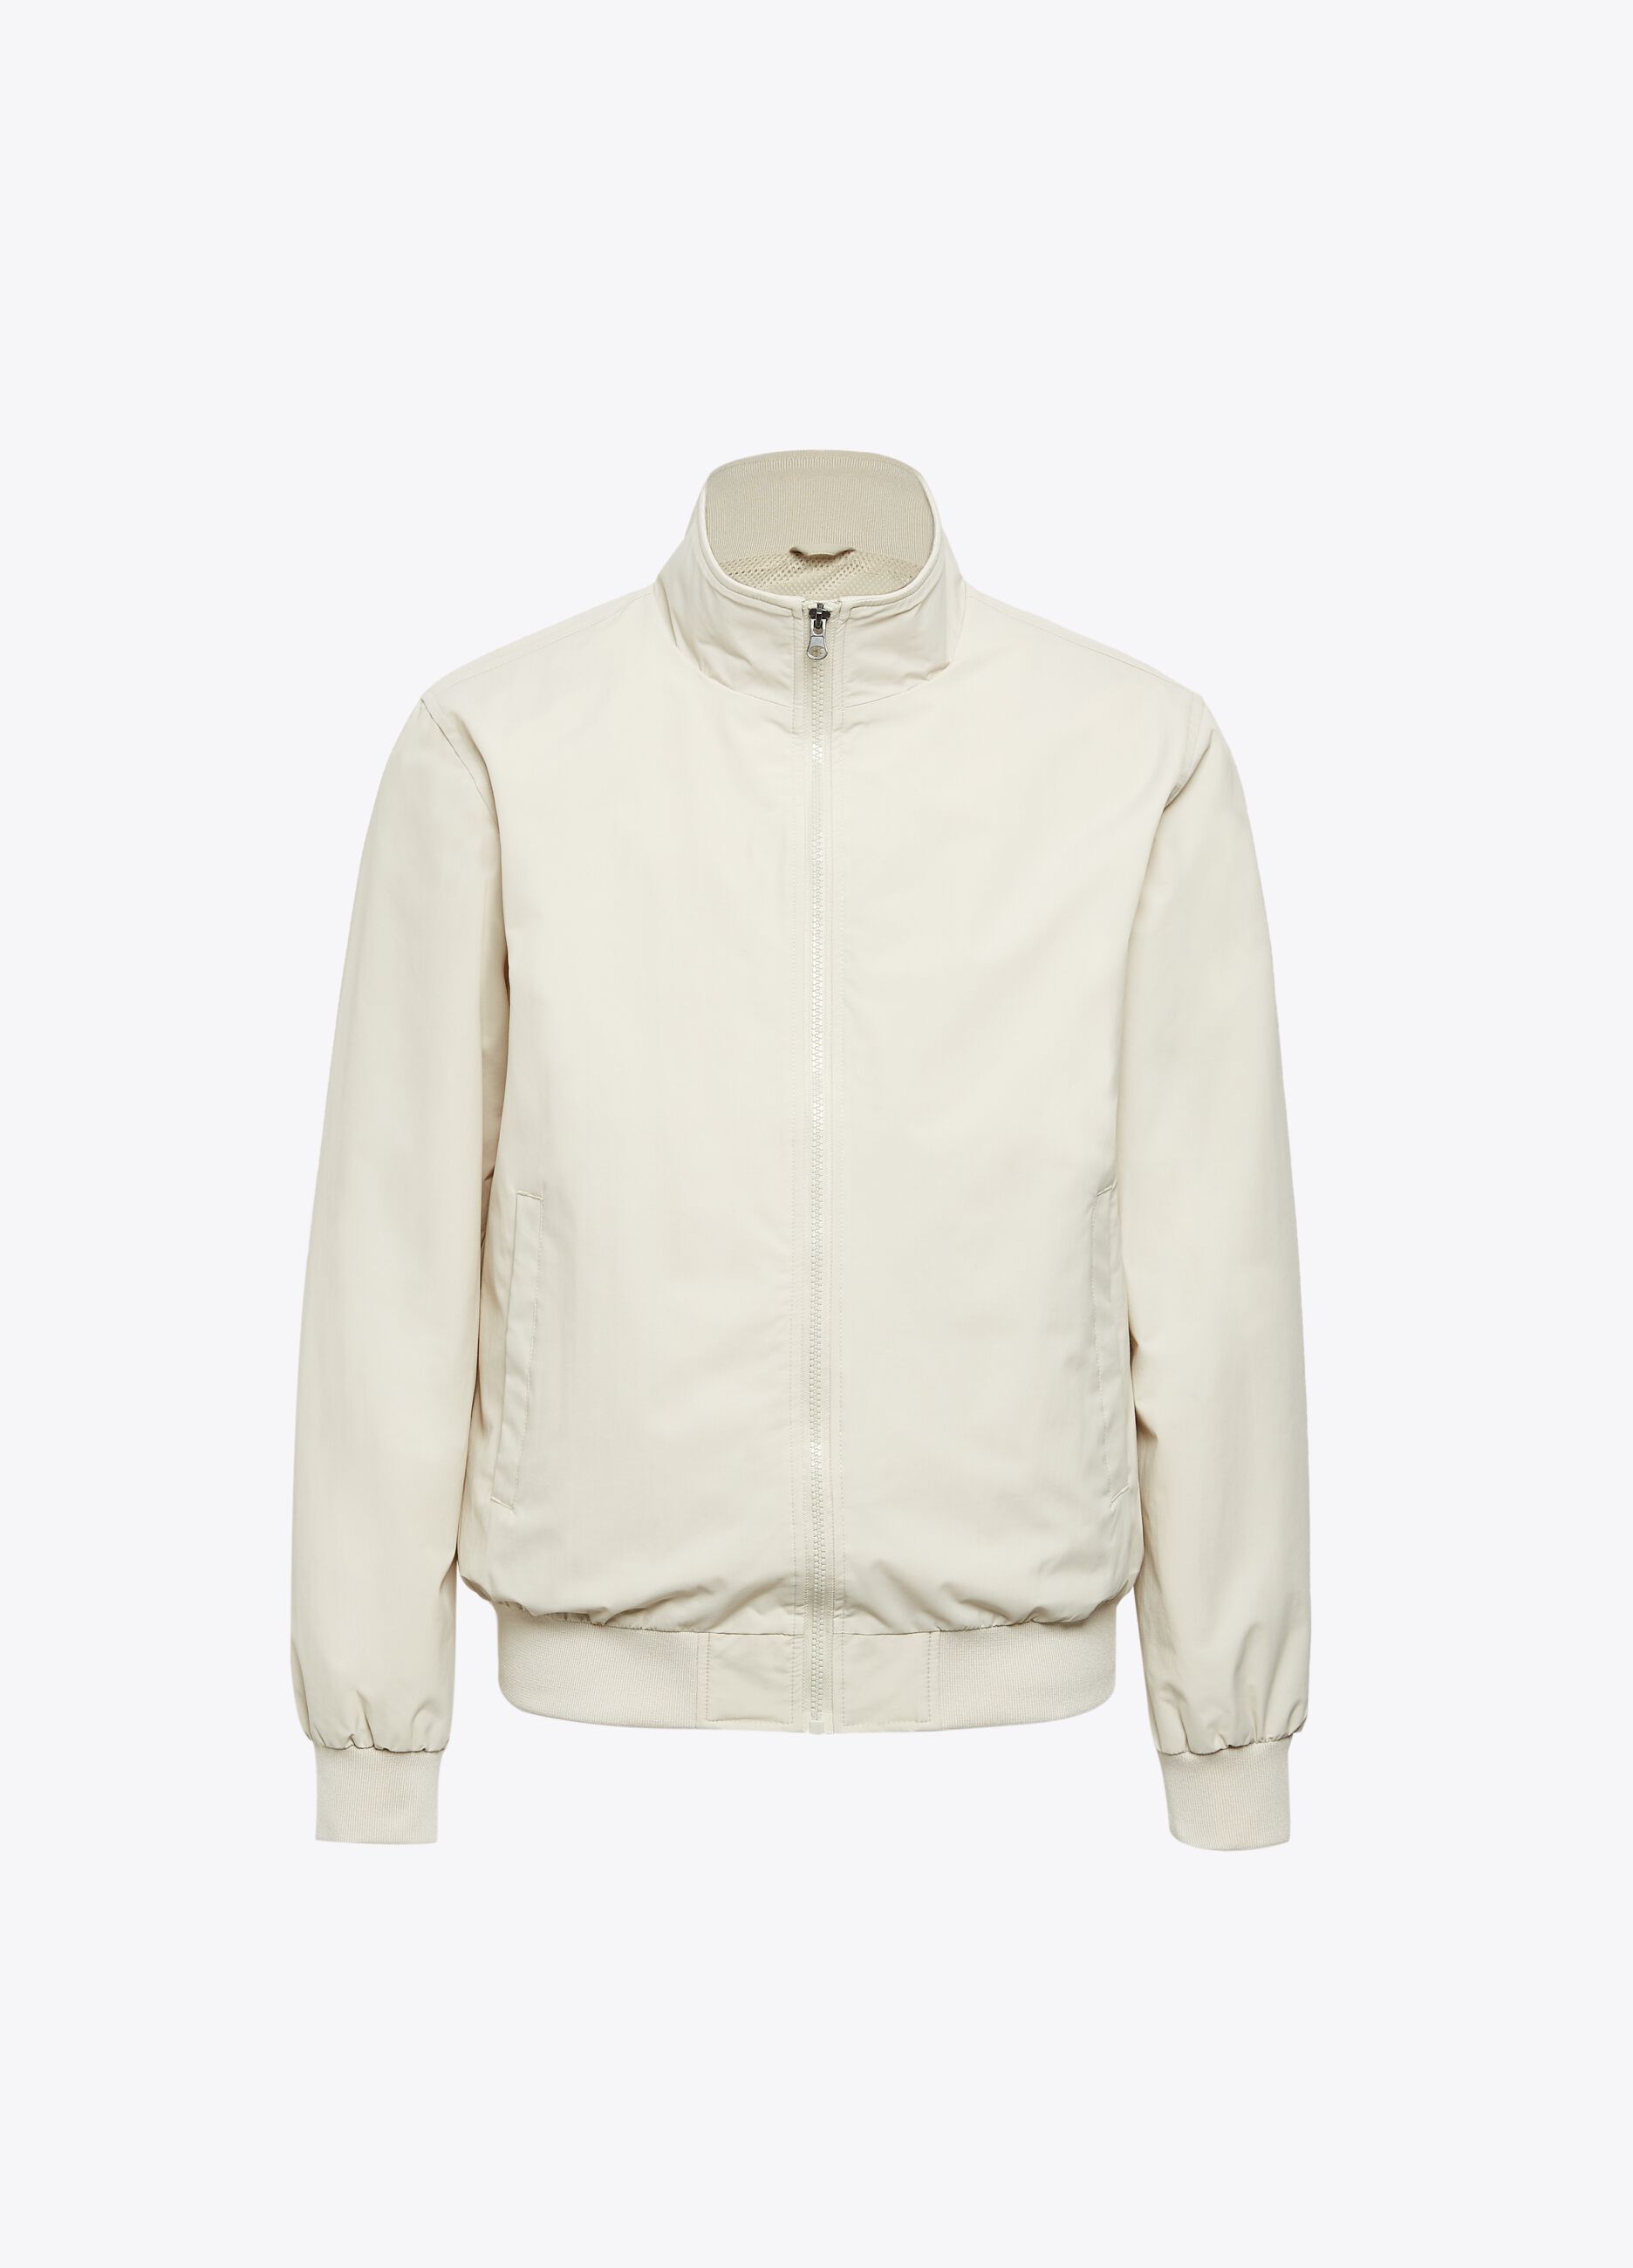 Bomber jacket with high neck